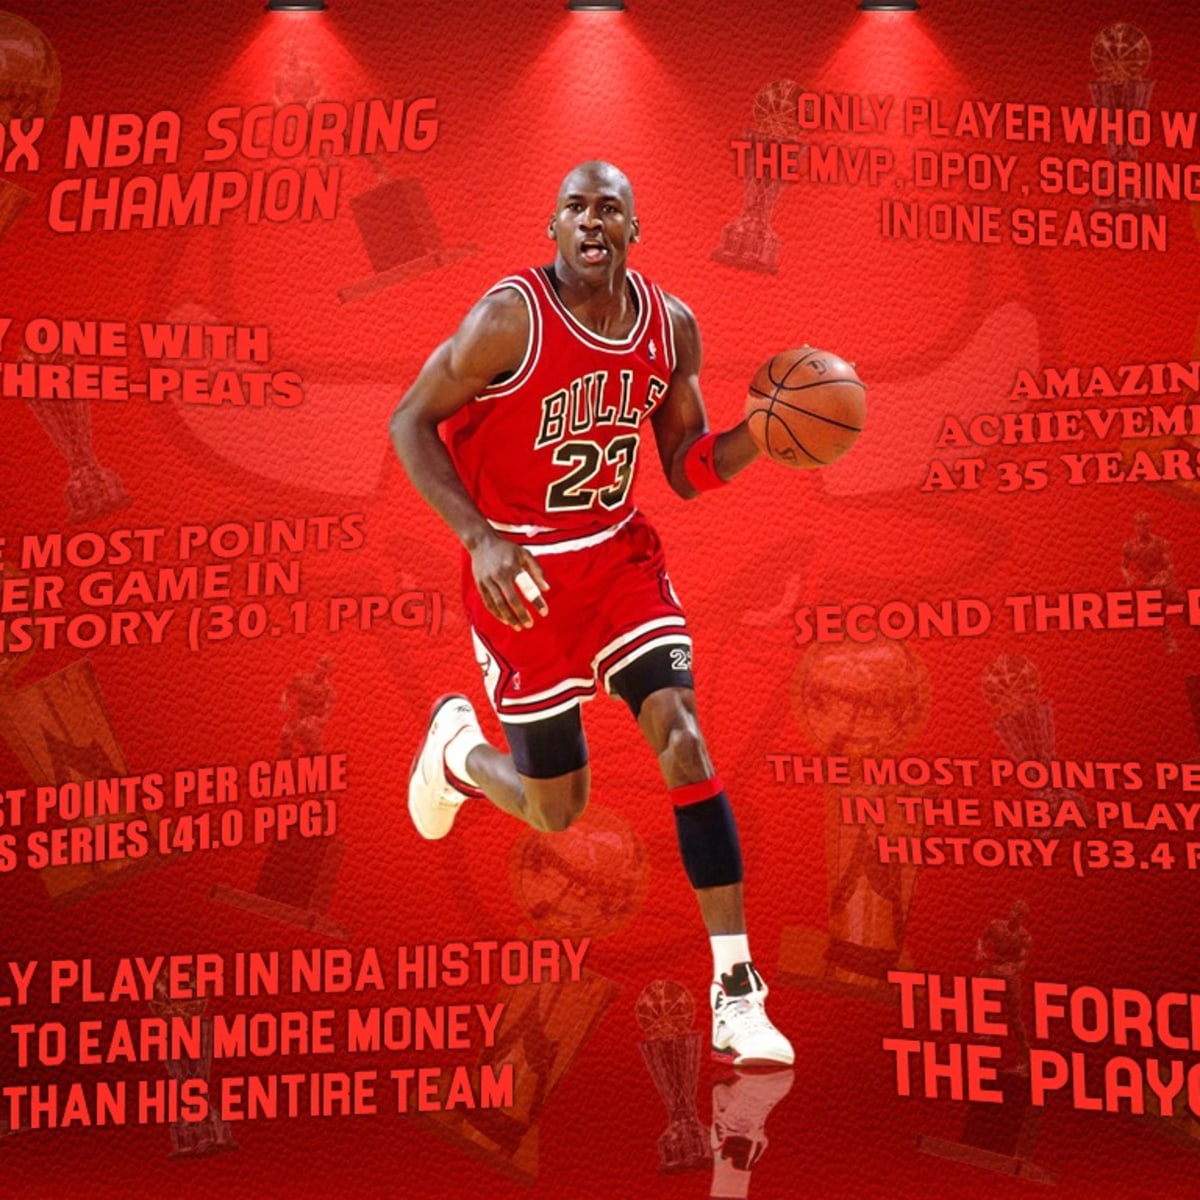 You won't believe how much Michael Jordan's jersey from the 1998